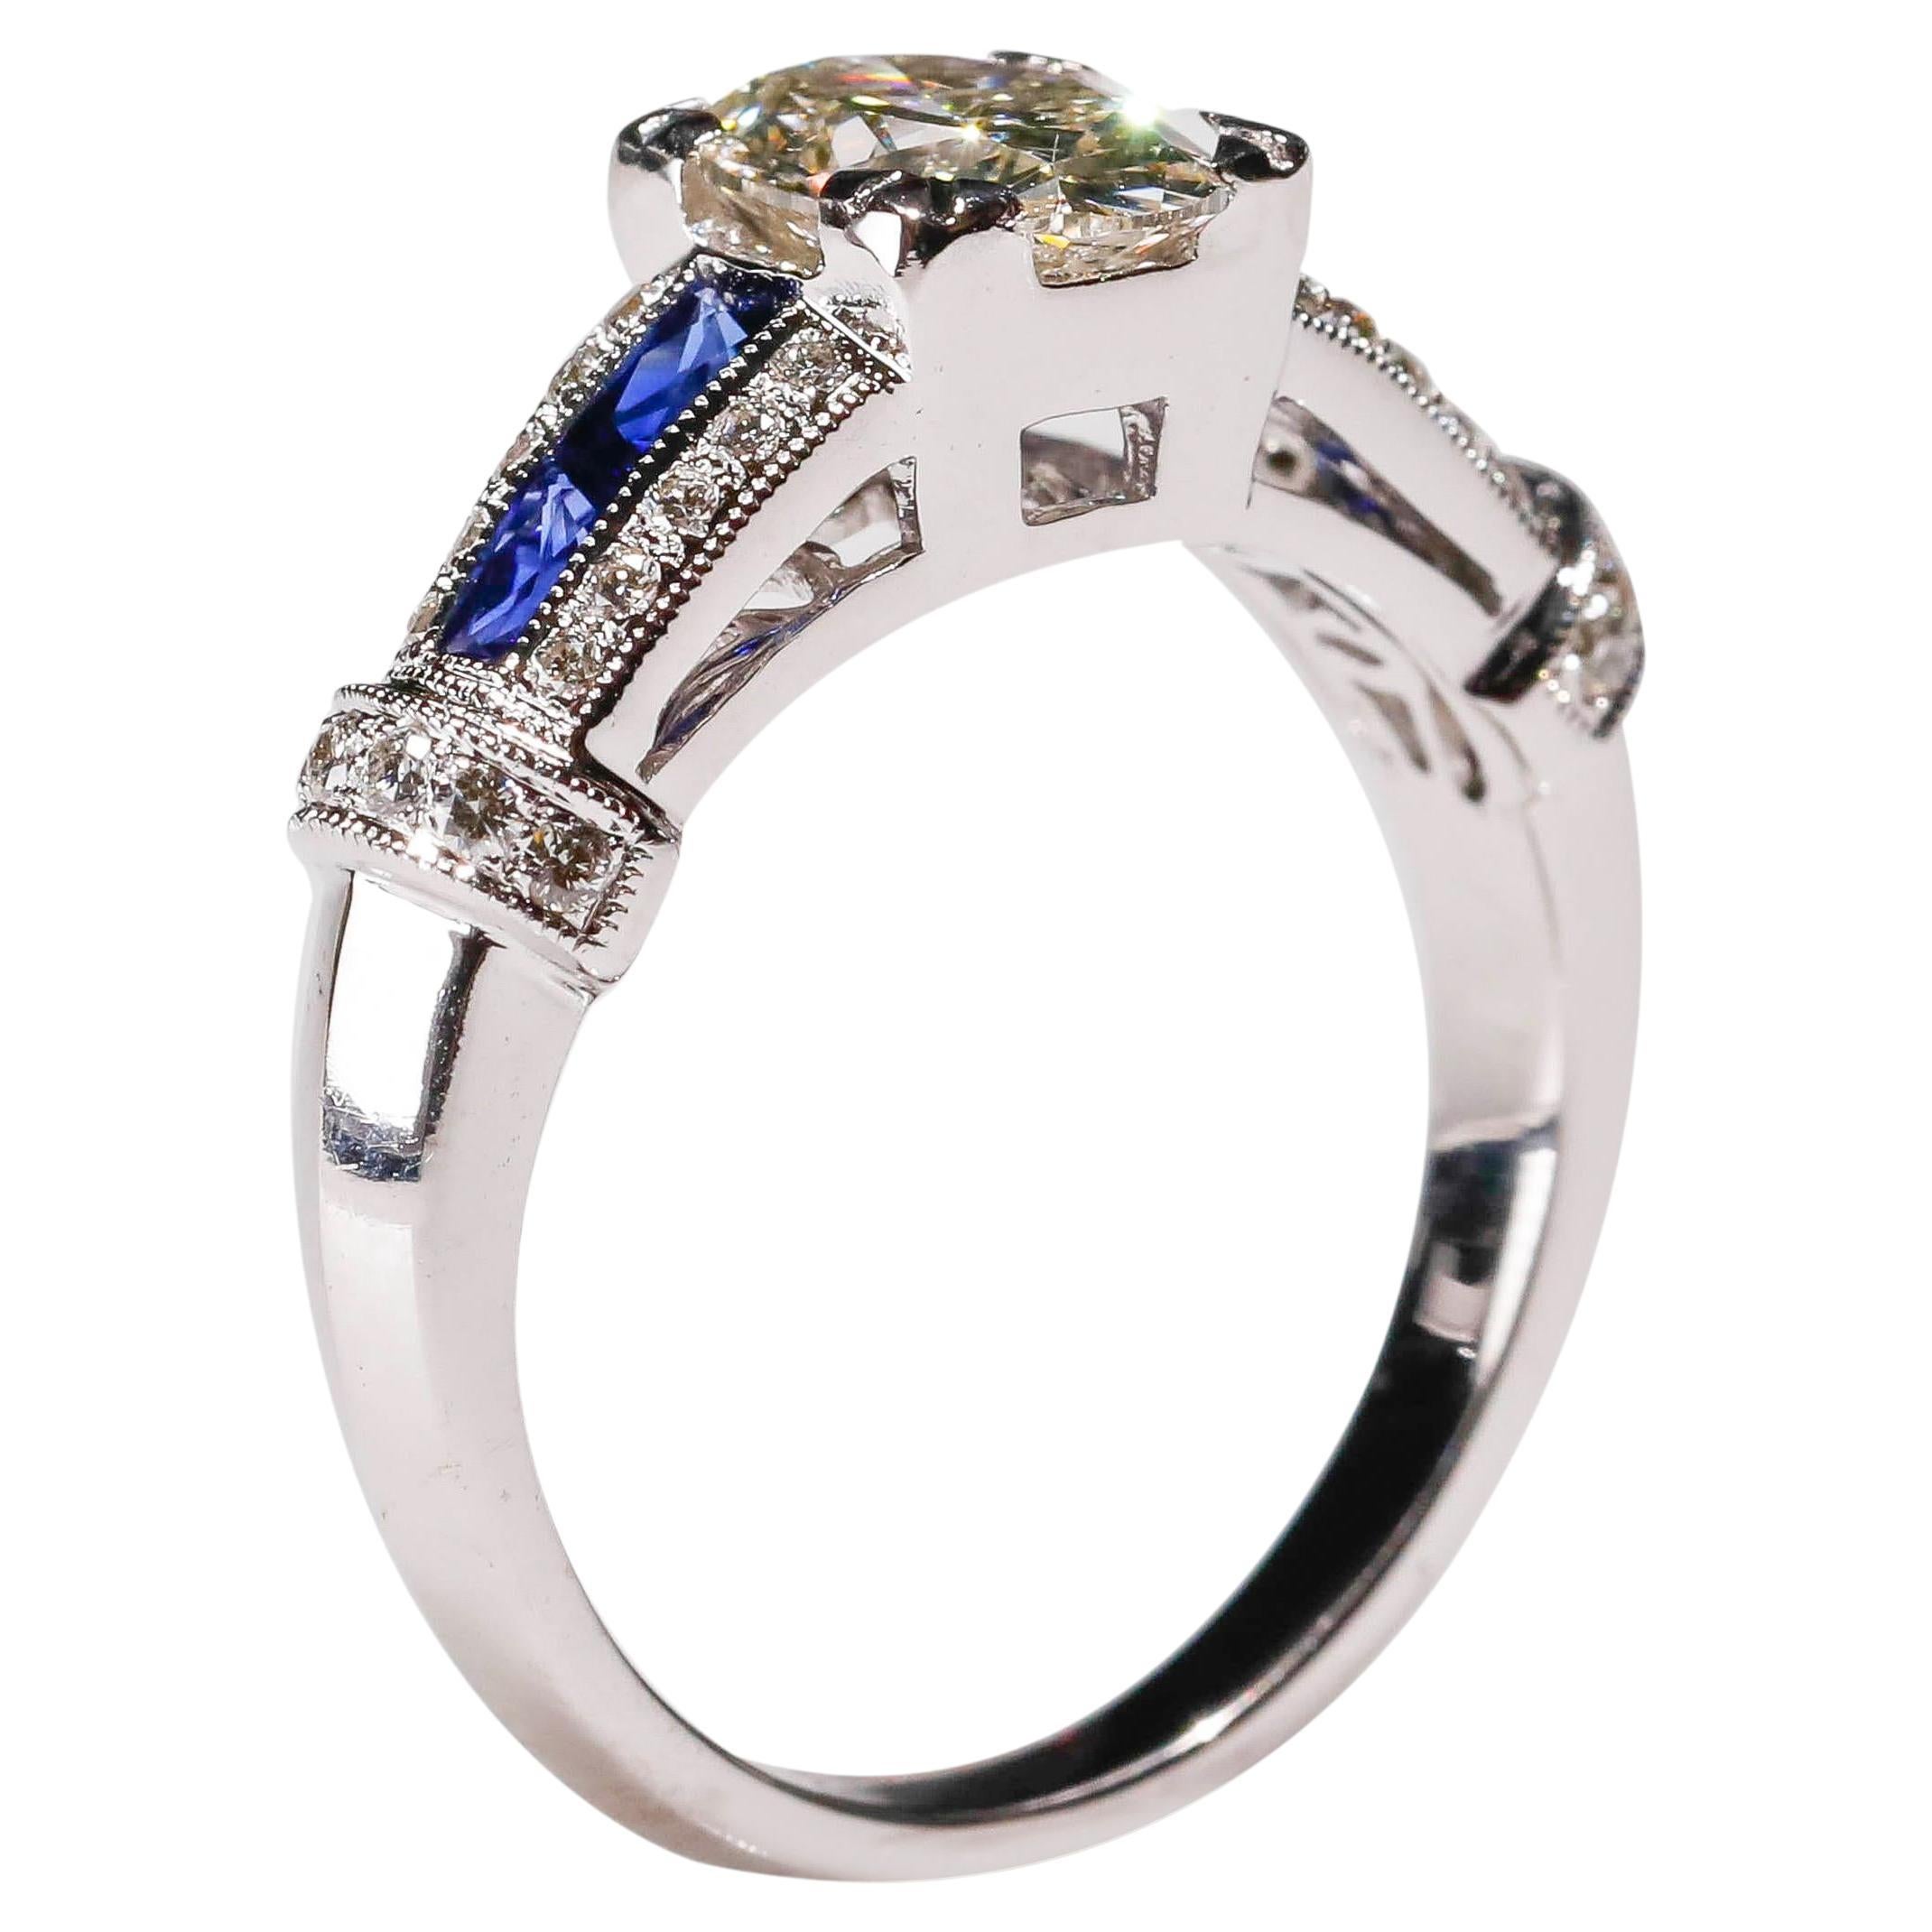 1.41 CT Diamond Blue Sapphire 18 KT White Gold Engagement Fine Ring

Crafted in 18 kt White Gold, this Unique design showcases blue sapphire 1.41 TCW oval-shaped diamond, set in a halo of oval mesmerizing diamonds, Polished to a brilliant